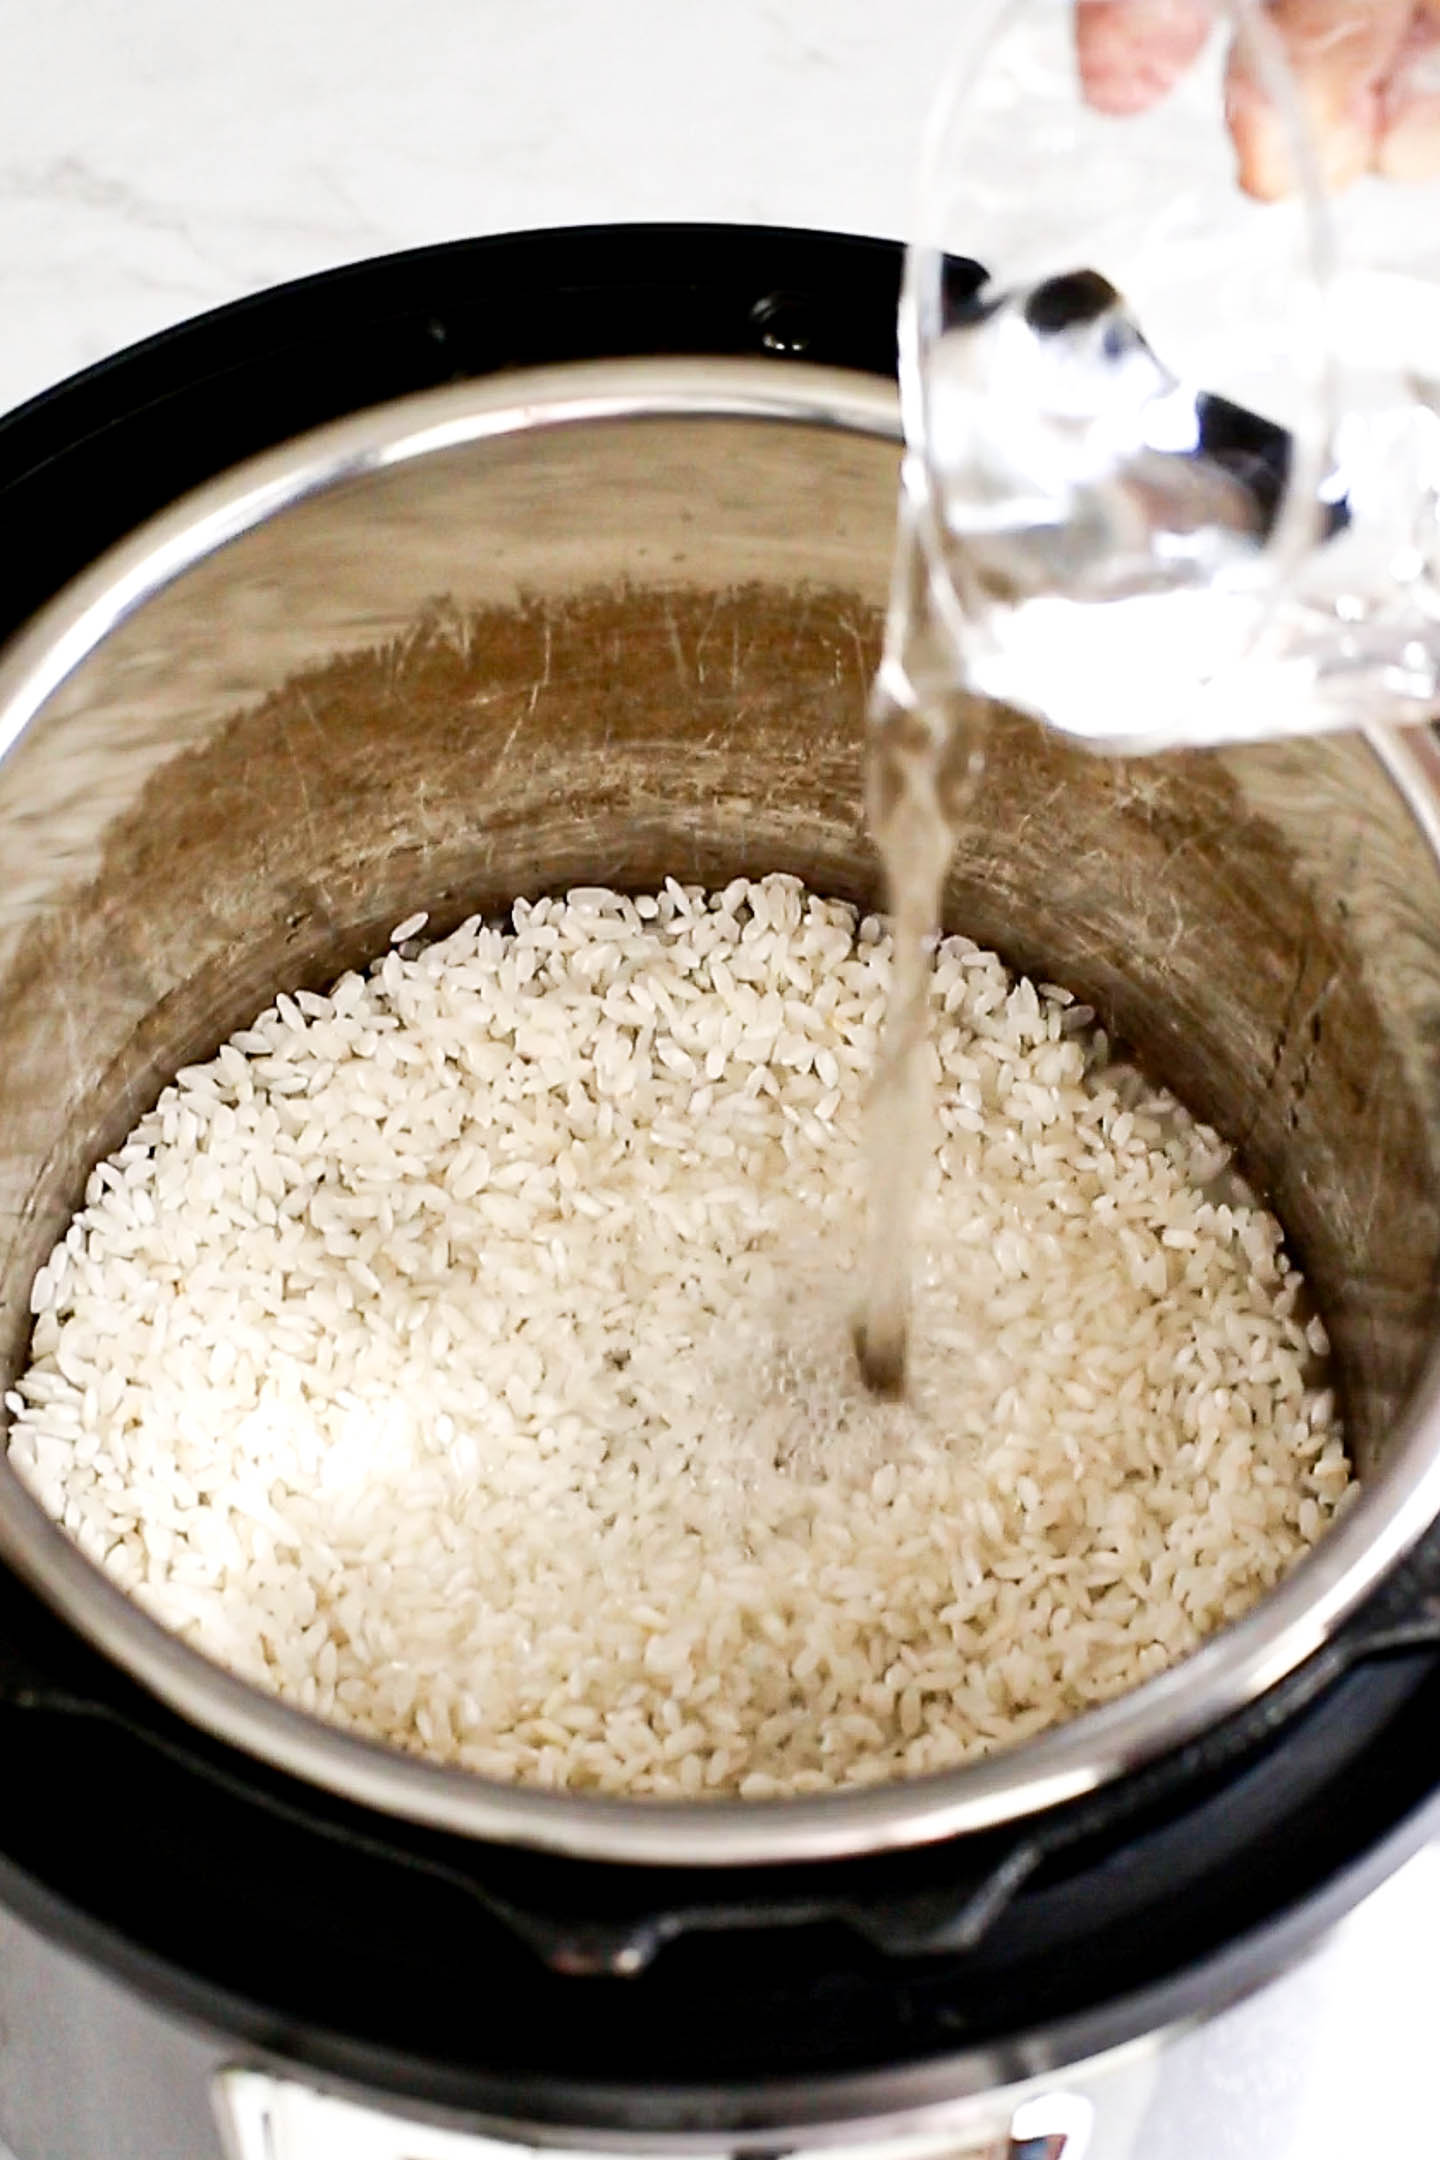 How To Make White Rice In Instant Pot STEP 3 Add Water to the Pot